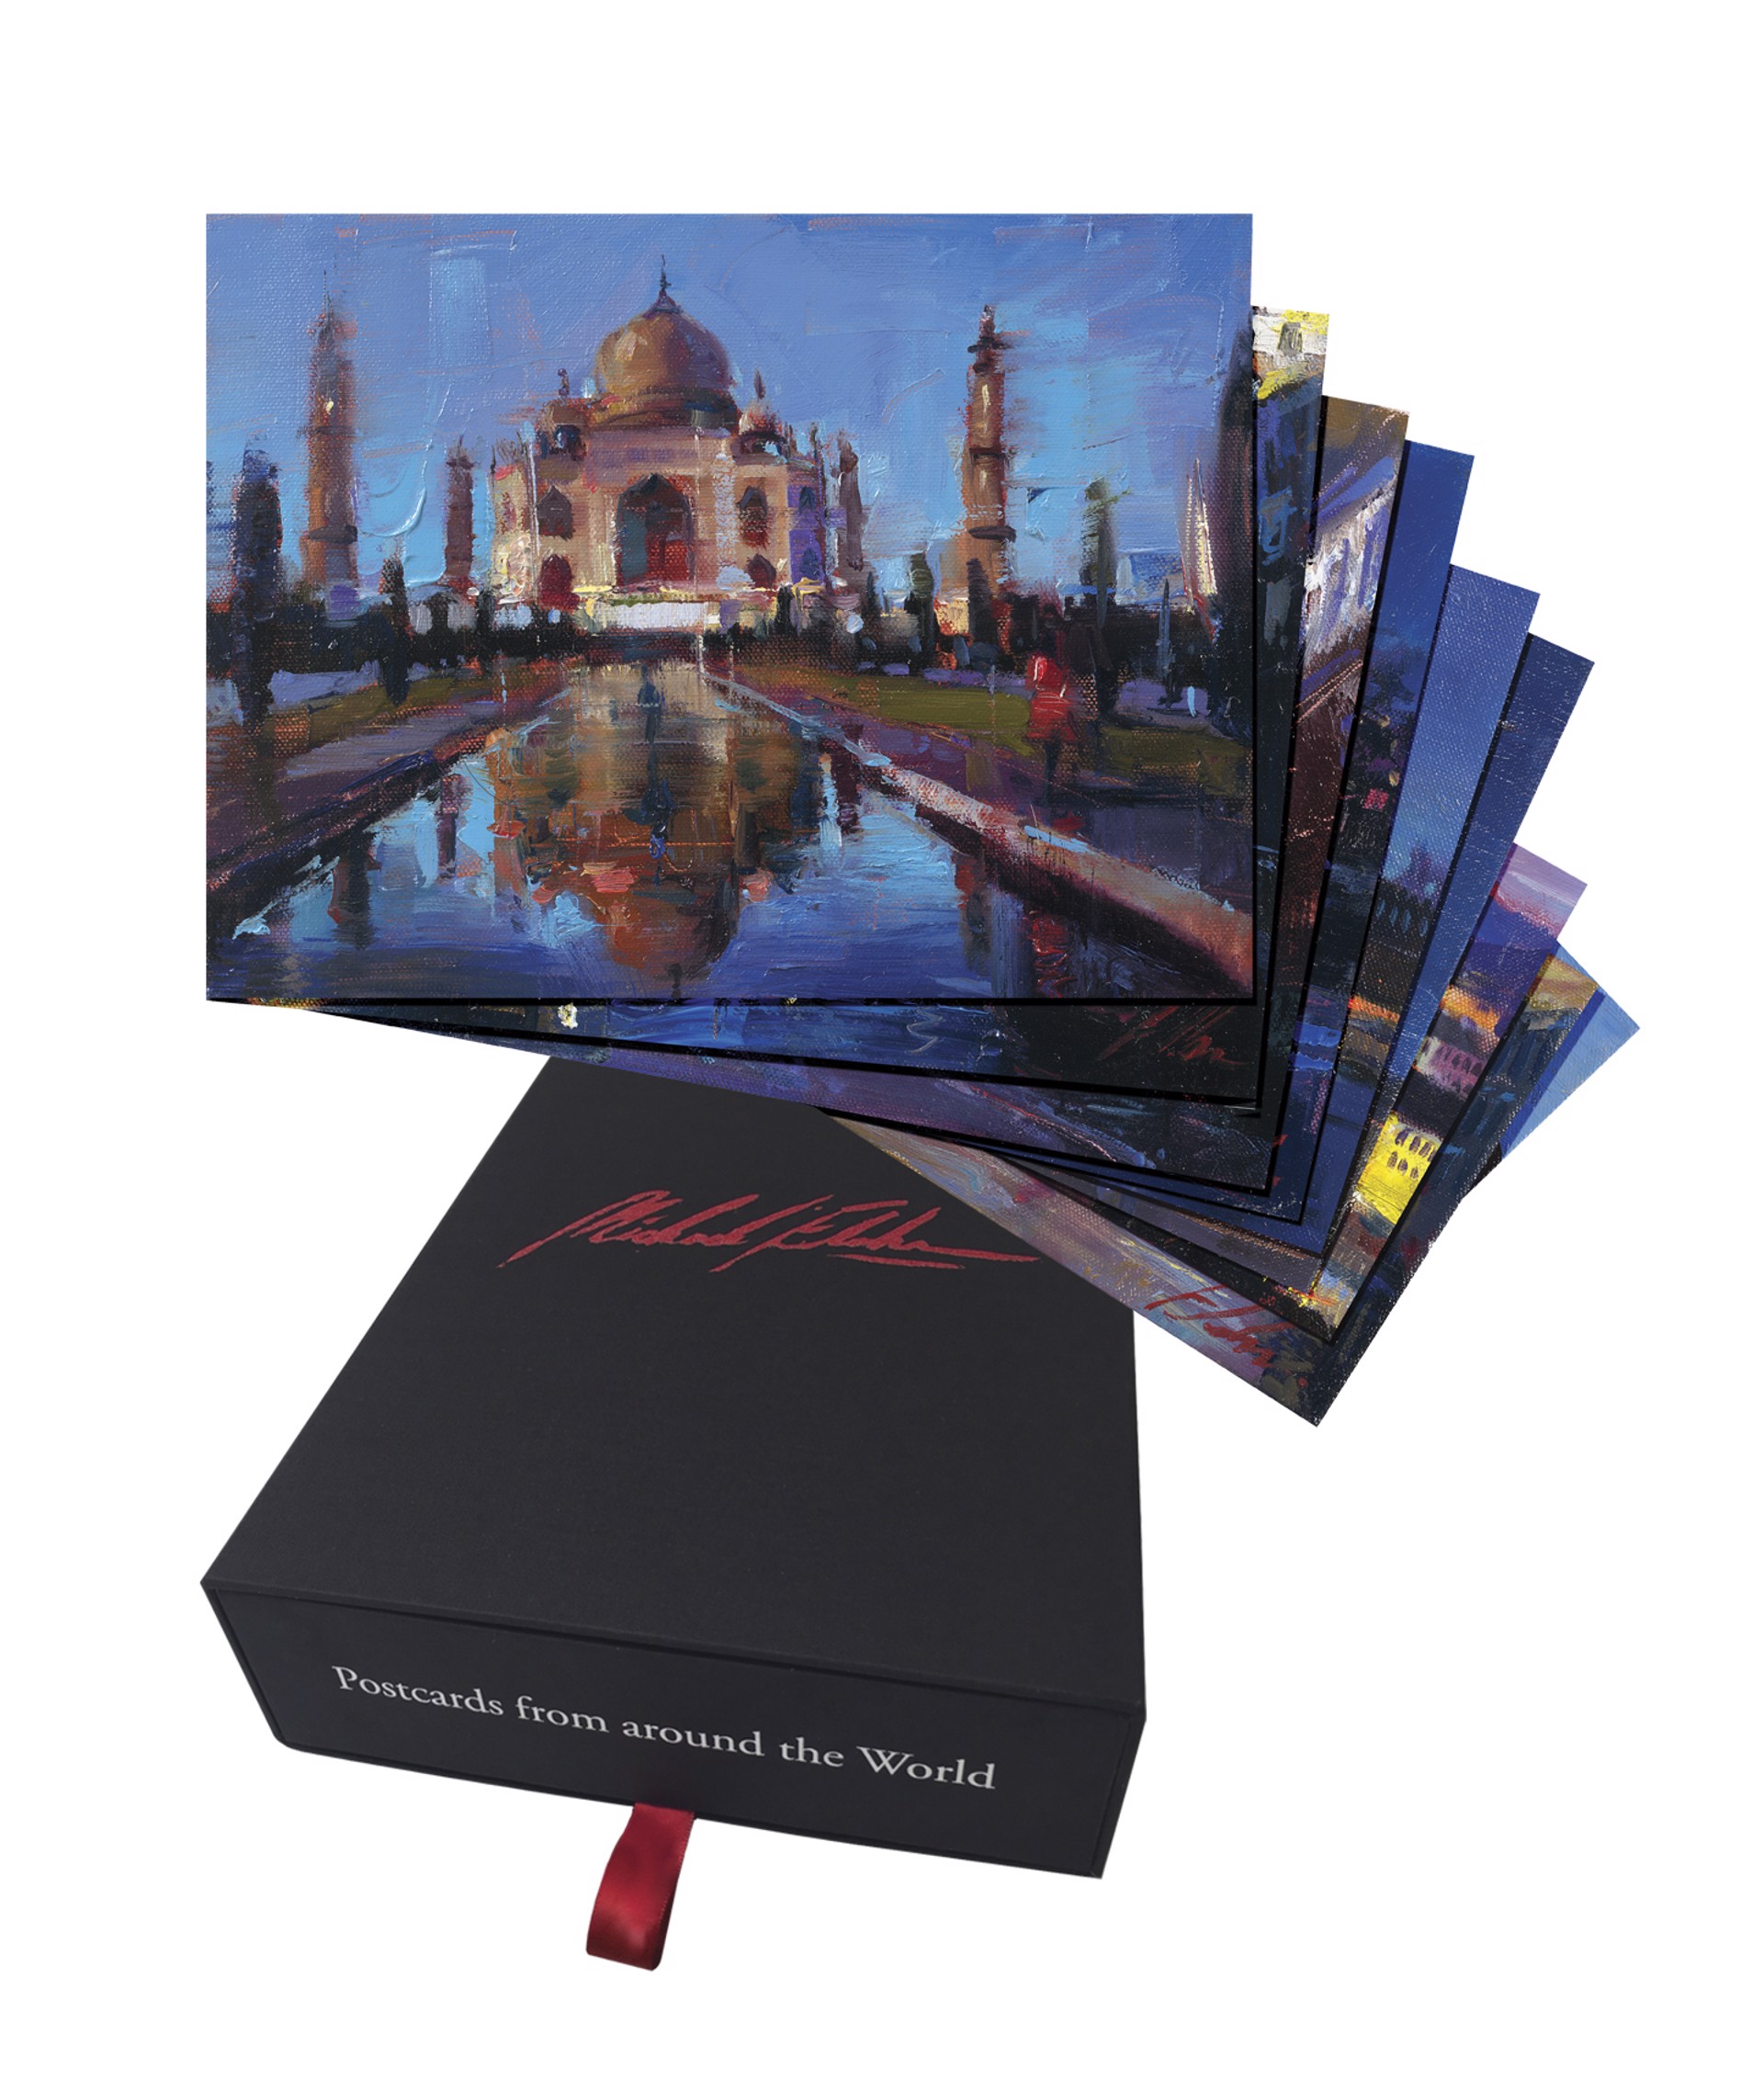 Postcards From Around the World 12 Prints: Box Sets by Michael Flohr